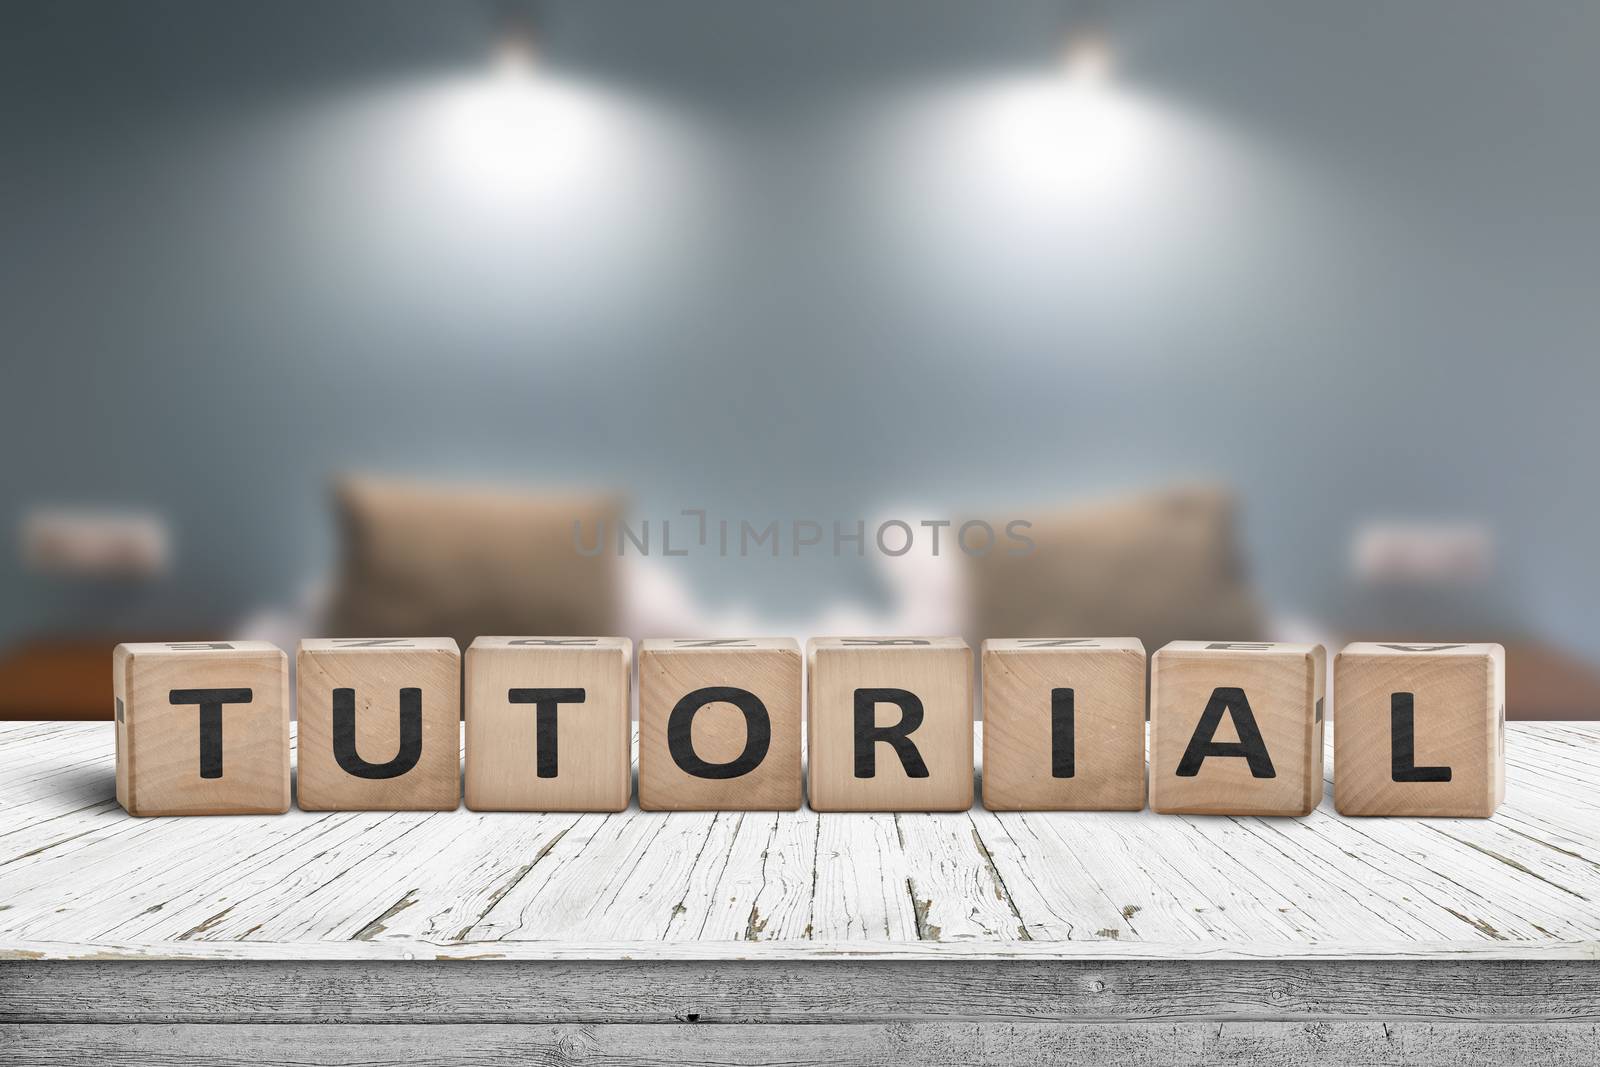 Tutorial sign on a wooden table in a room with lights on a blurry background